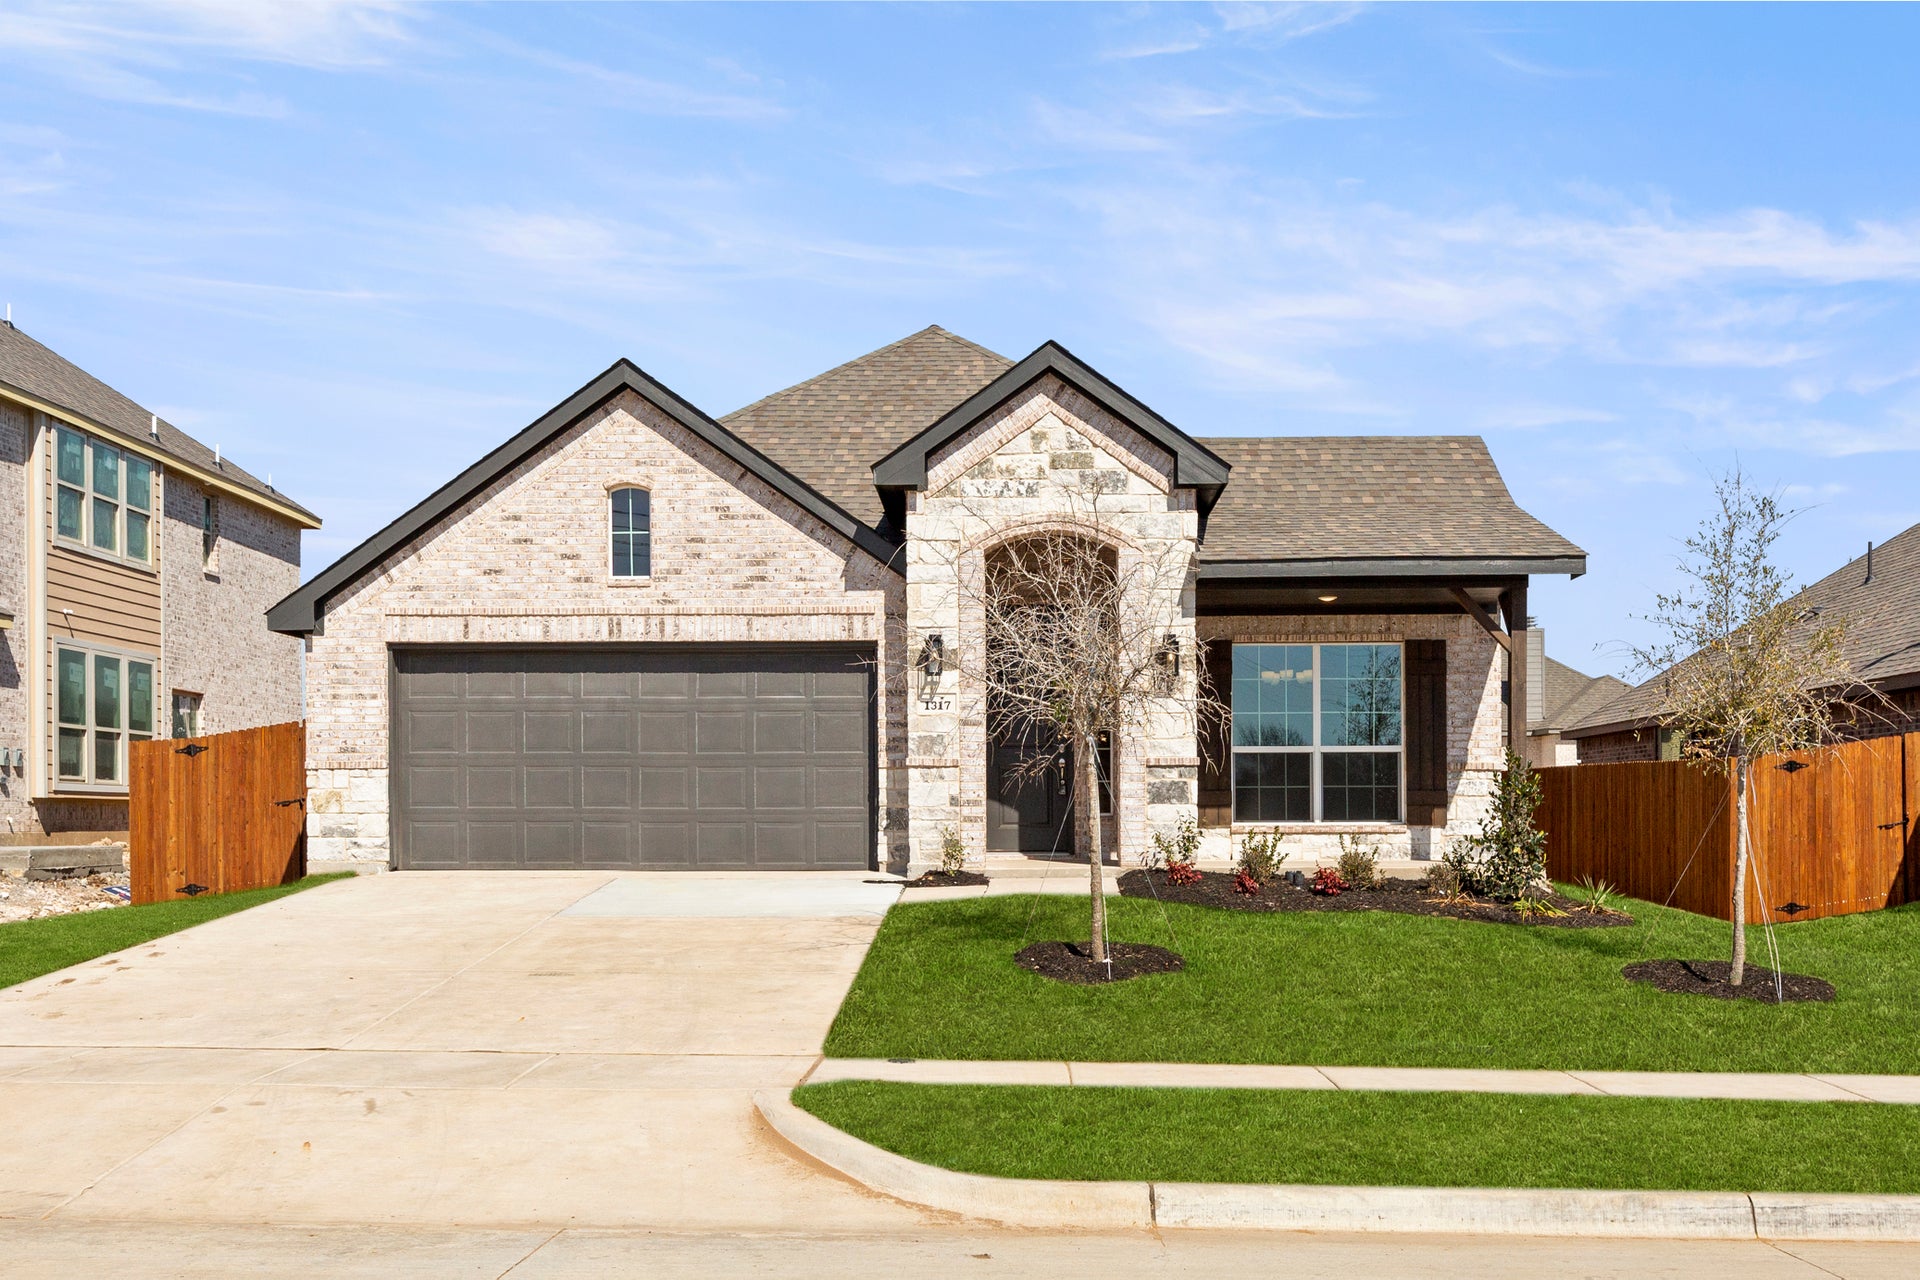 2065 C with Stone. 2,065sf New Home in Joshua, TX